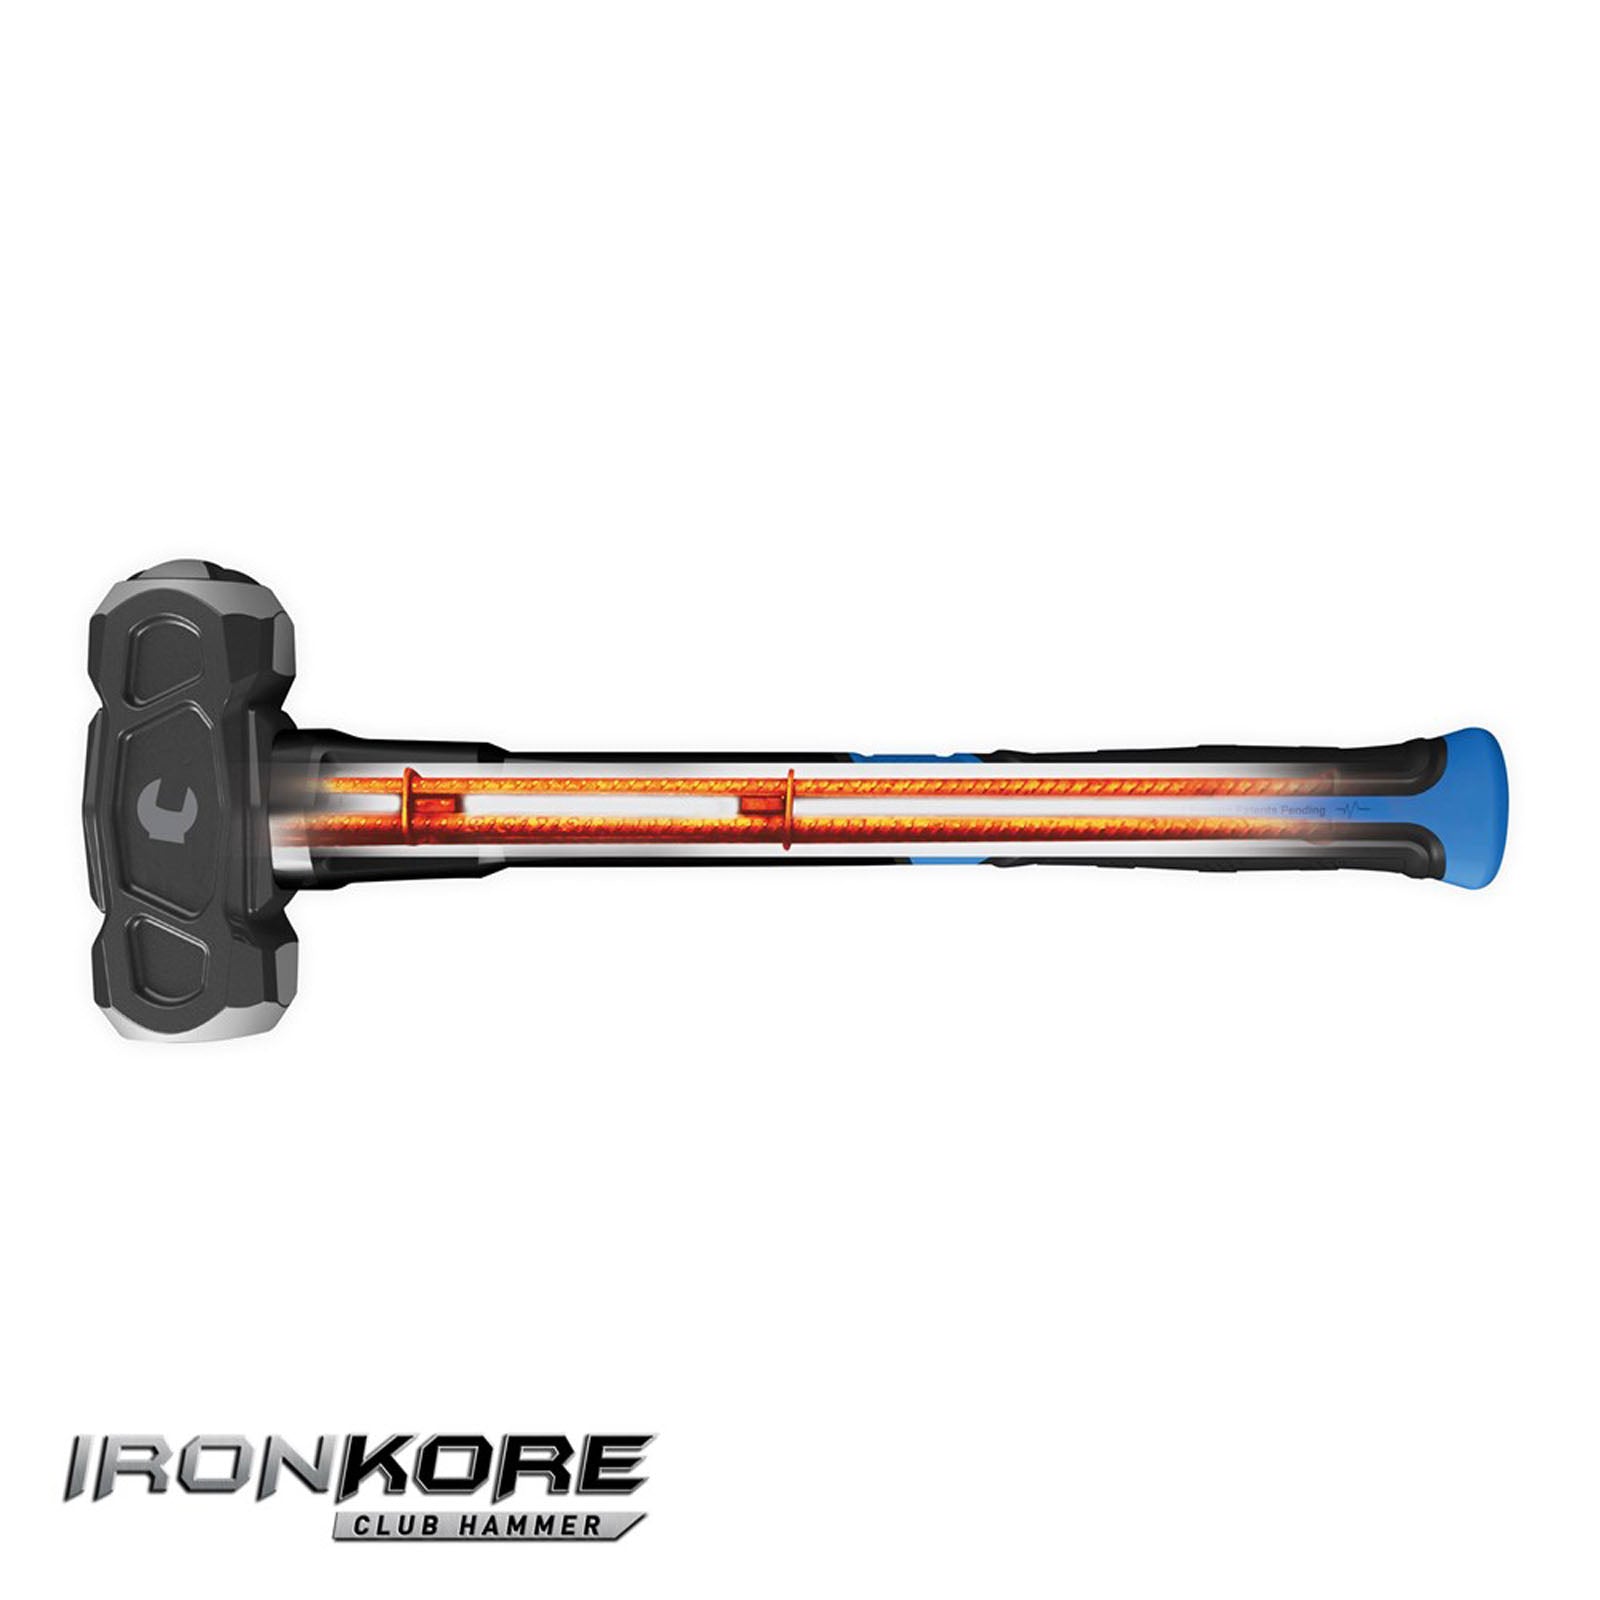 1.8Kg IRONKORE Club Hammer K9084 by Kincrome